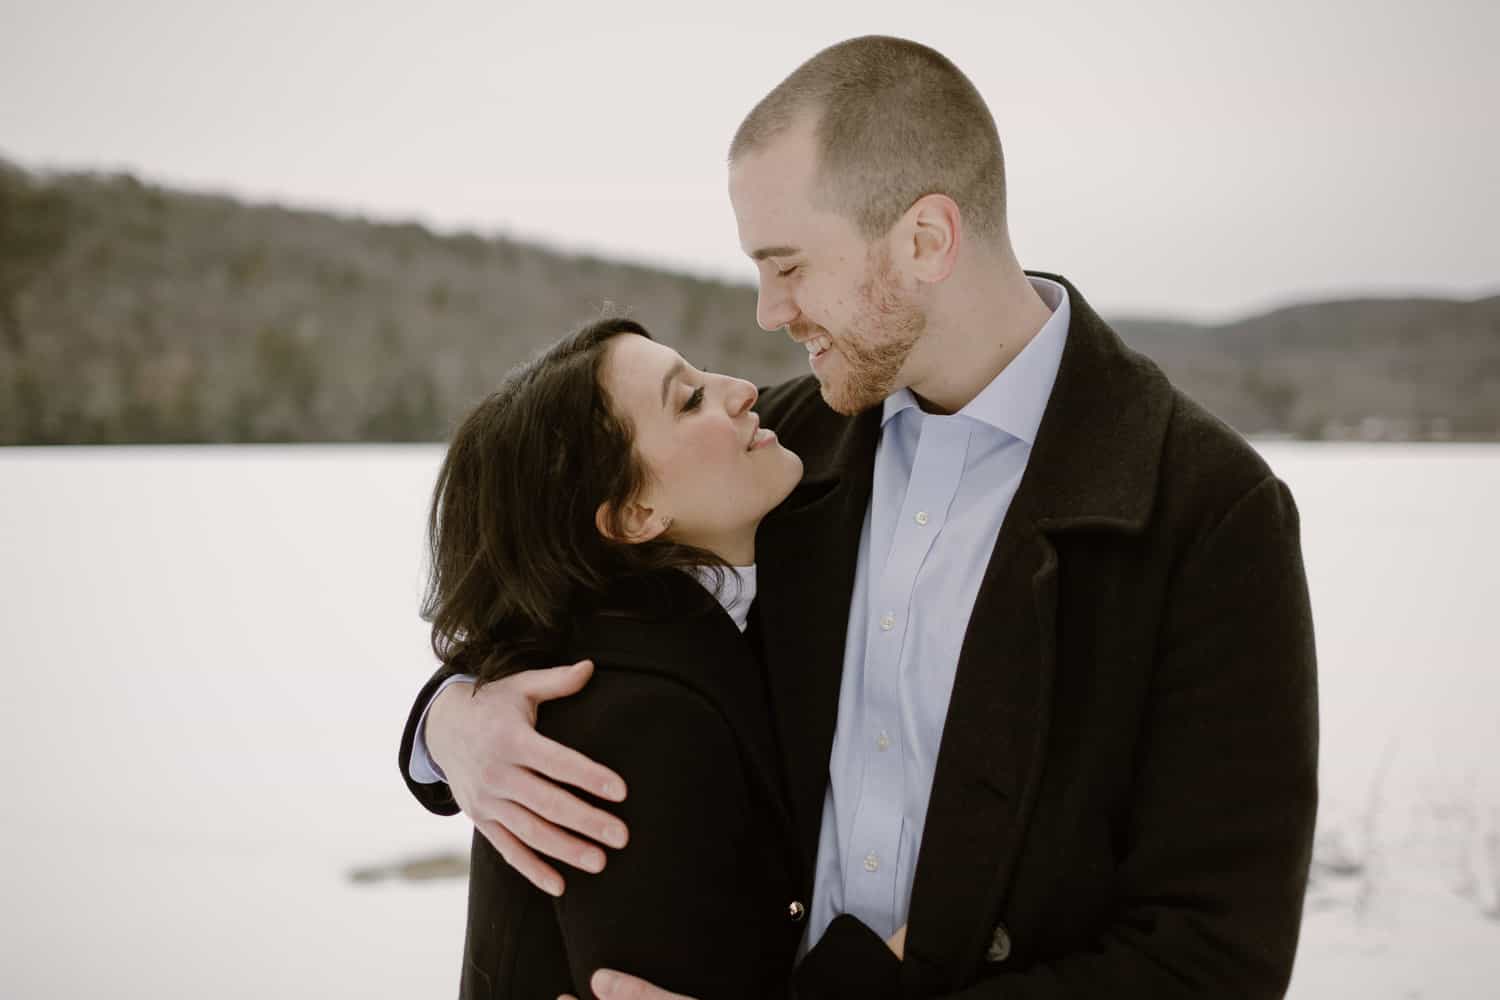 Snowy Winter Engagement Session in Berkshires 